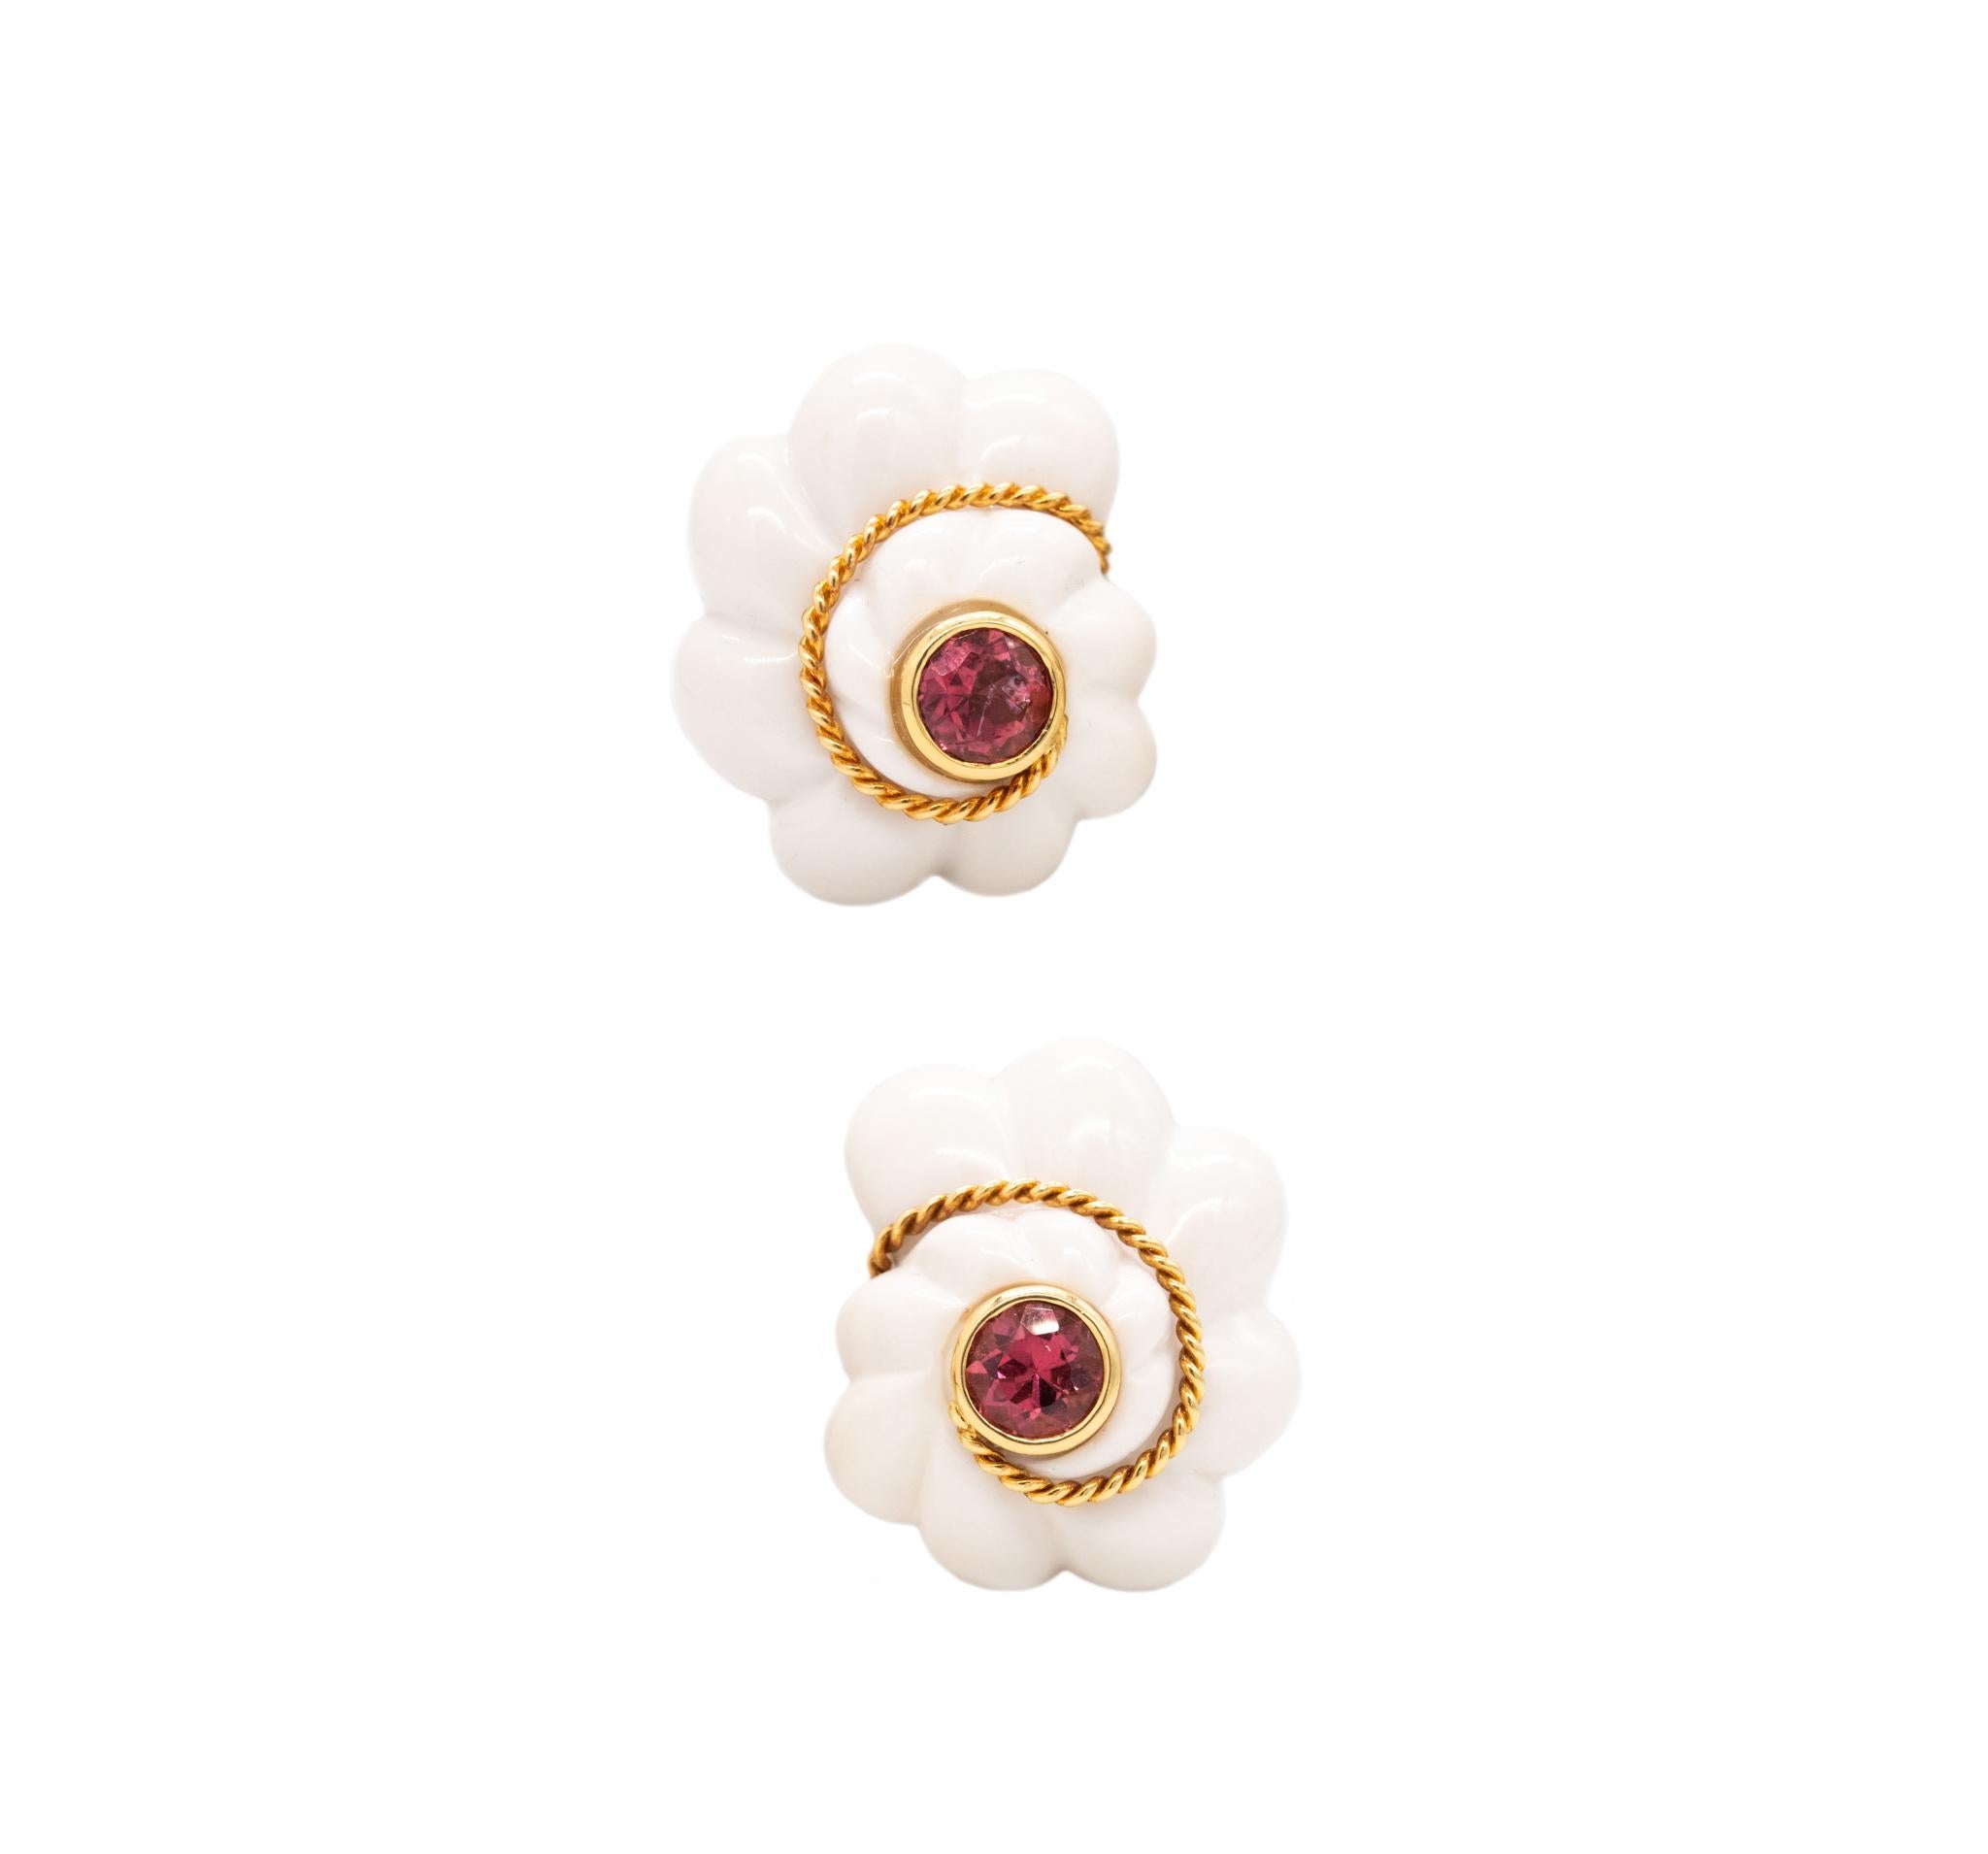 Pair of earrings designed by Valentin Magro.

A modern and sculptural beautiful pair, crafted in solid 18 karats of high polished yellow gold. They was conceived as a mirrored swirl pair and suited with hinged omega backs for fastening clips. The